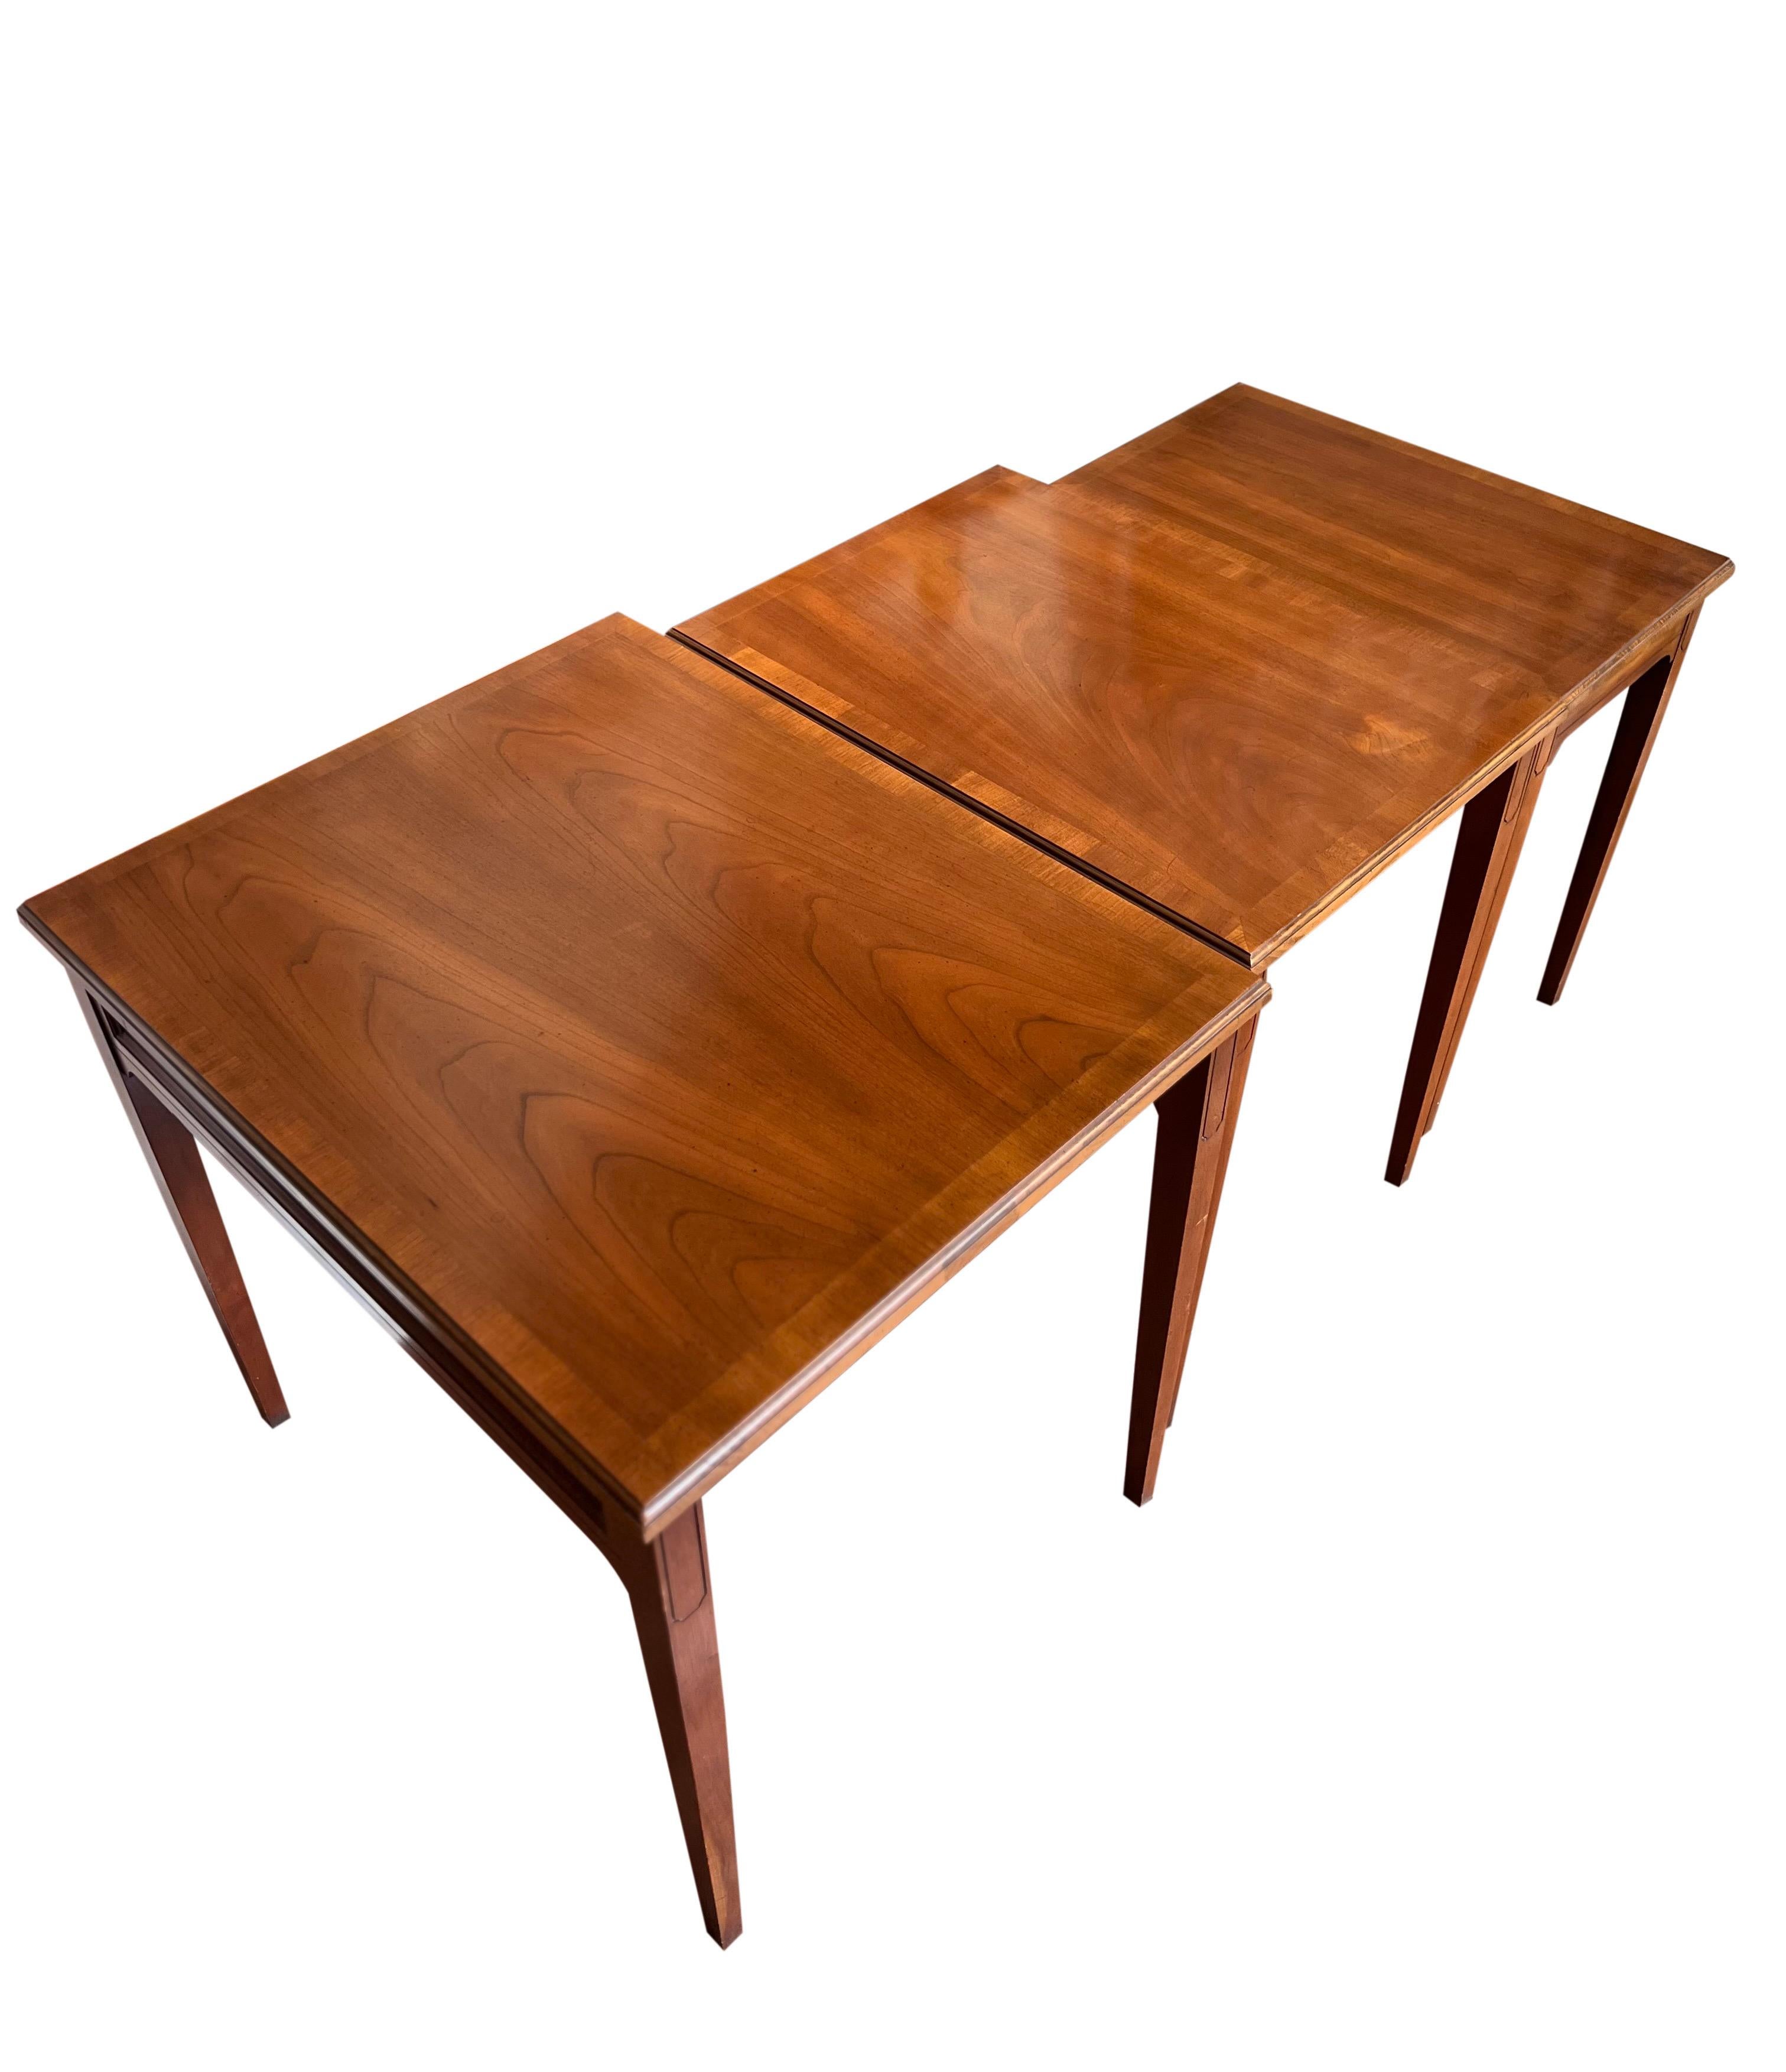 Midcentury Fruitwood Nesting Tables by Heritage, Set of 3 For Sale 1